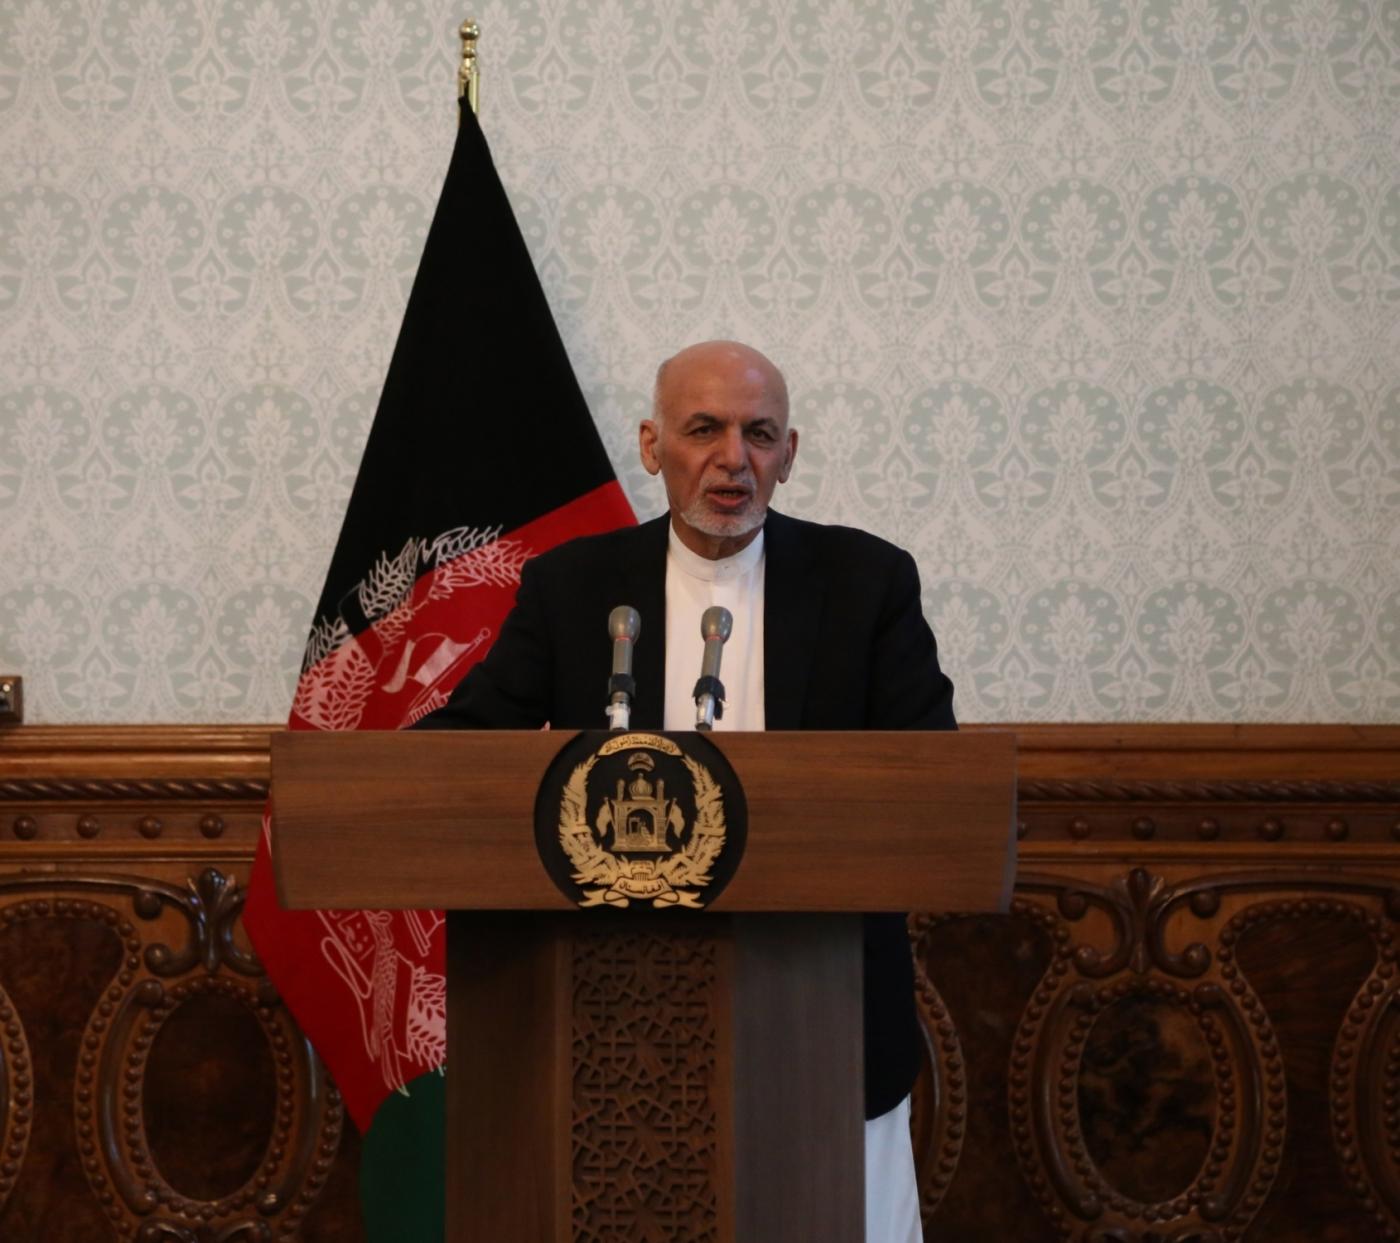 KABUL, Nov. 6, 2018 (Xinhua) -- Afghan President Mohammad Ashraf Ghani speaks during a joint press conference with NATO's Secretary General Jens Stoltenberg (not seen in the picture) in Kabul, capital of Afghanistan, Nov. 6, 2018. Visiting NATO Secretary General Jens Stoltenberg assured the military alliance's firm support to Afghanistan's security forces here on Tuesday. (Xinhua/Rahmat Alizadah/IANS) by .